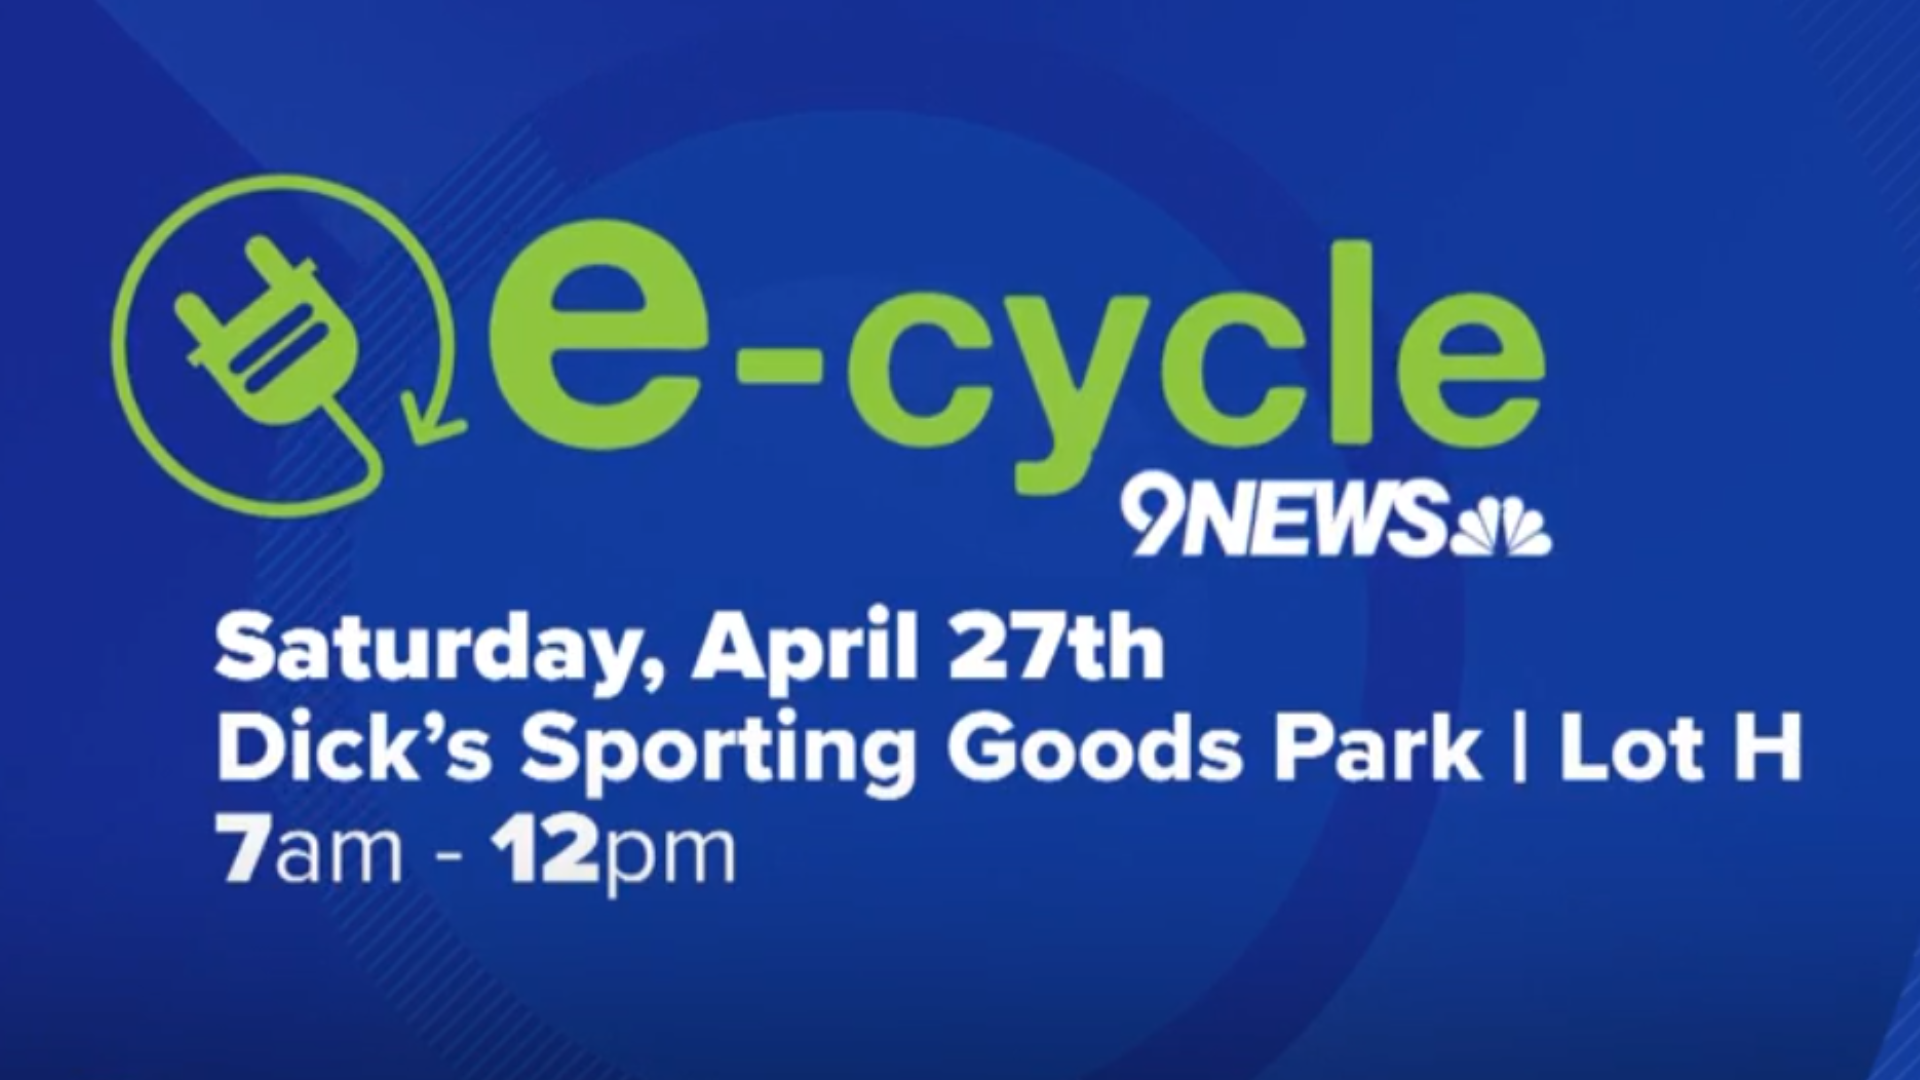 9NEWS has partnered with Techno Rescue to host an electronic recycling event at Dick's Sporting Goods Park in Commerce City on Saturday, April 27, 2019.